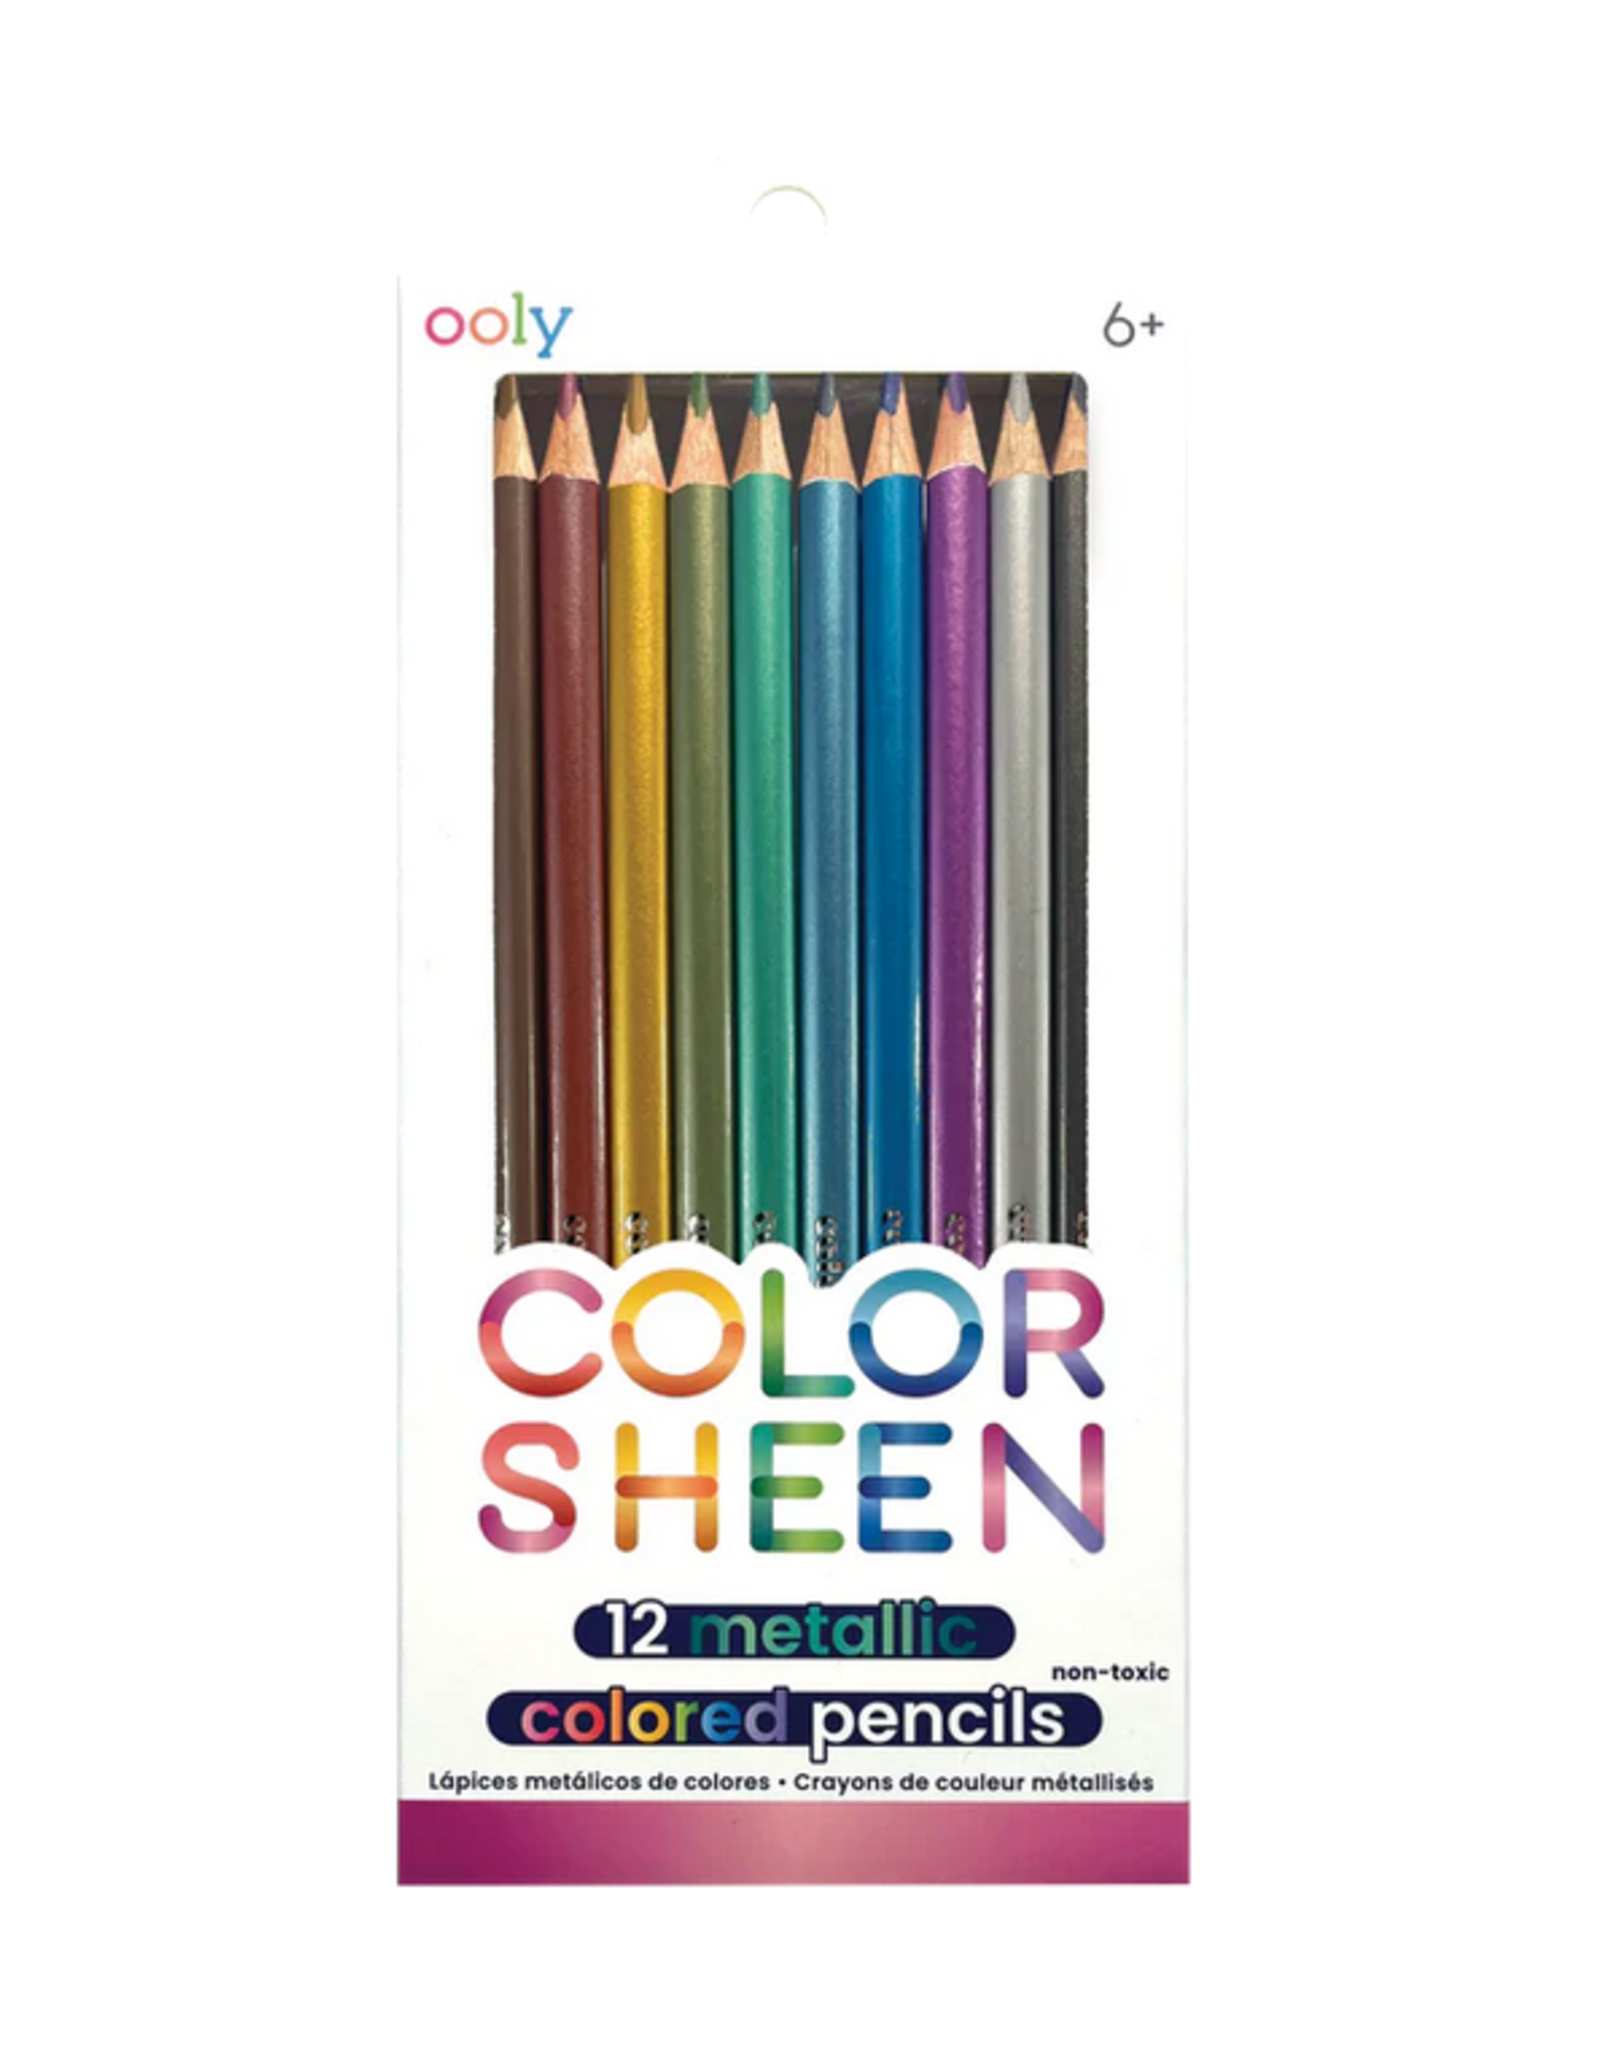 ooly OOLY Color Sheen Metallic Colored Pencils